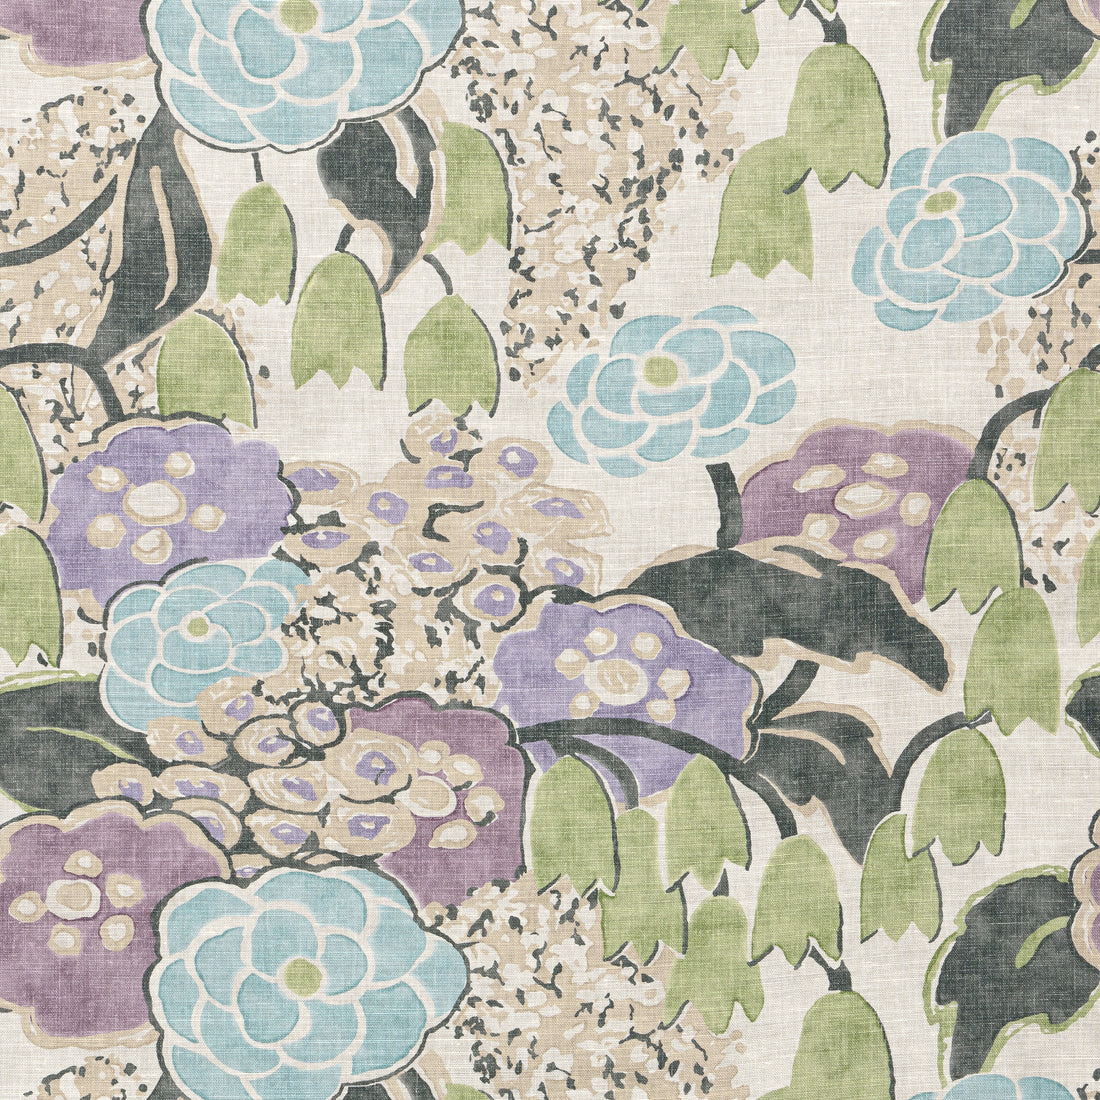 Laura fabric in lavender and green color - pattern number AF23101 - by Anna French in the Willow Tree collection